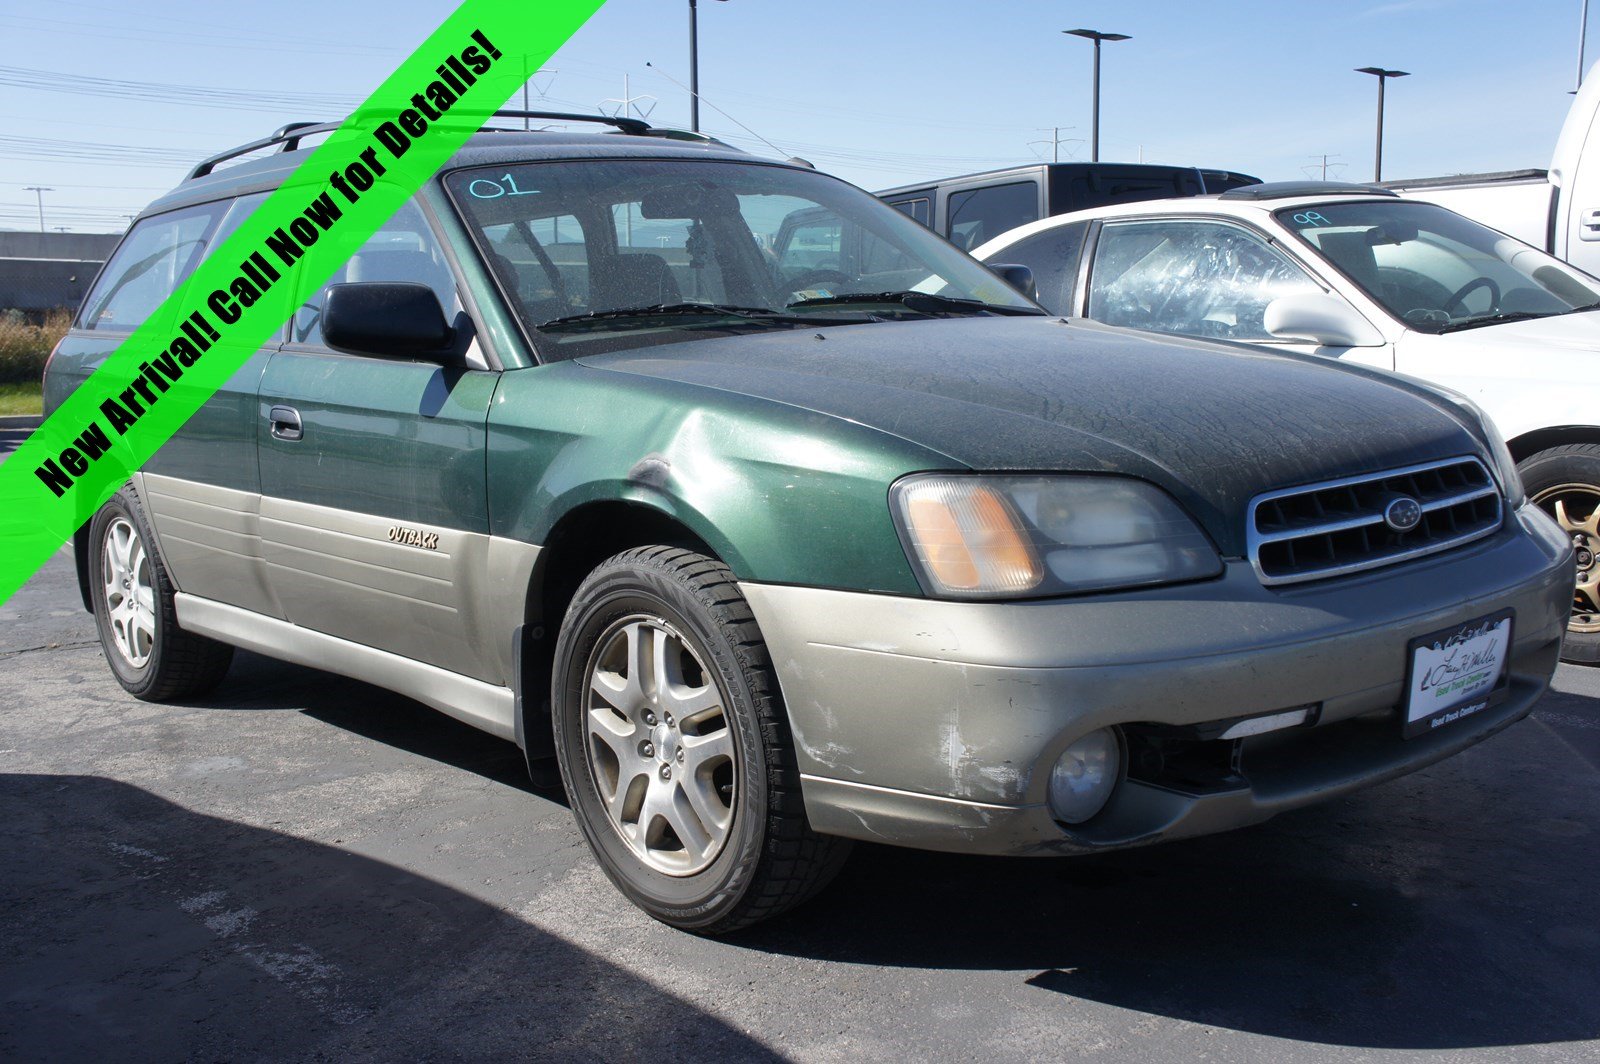 PreOwned 2001 Subaru Legacy Wagon Outback w/RB Equip